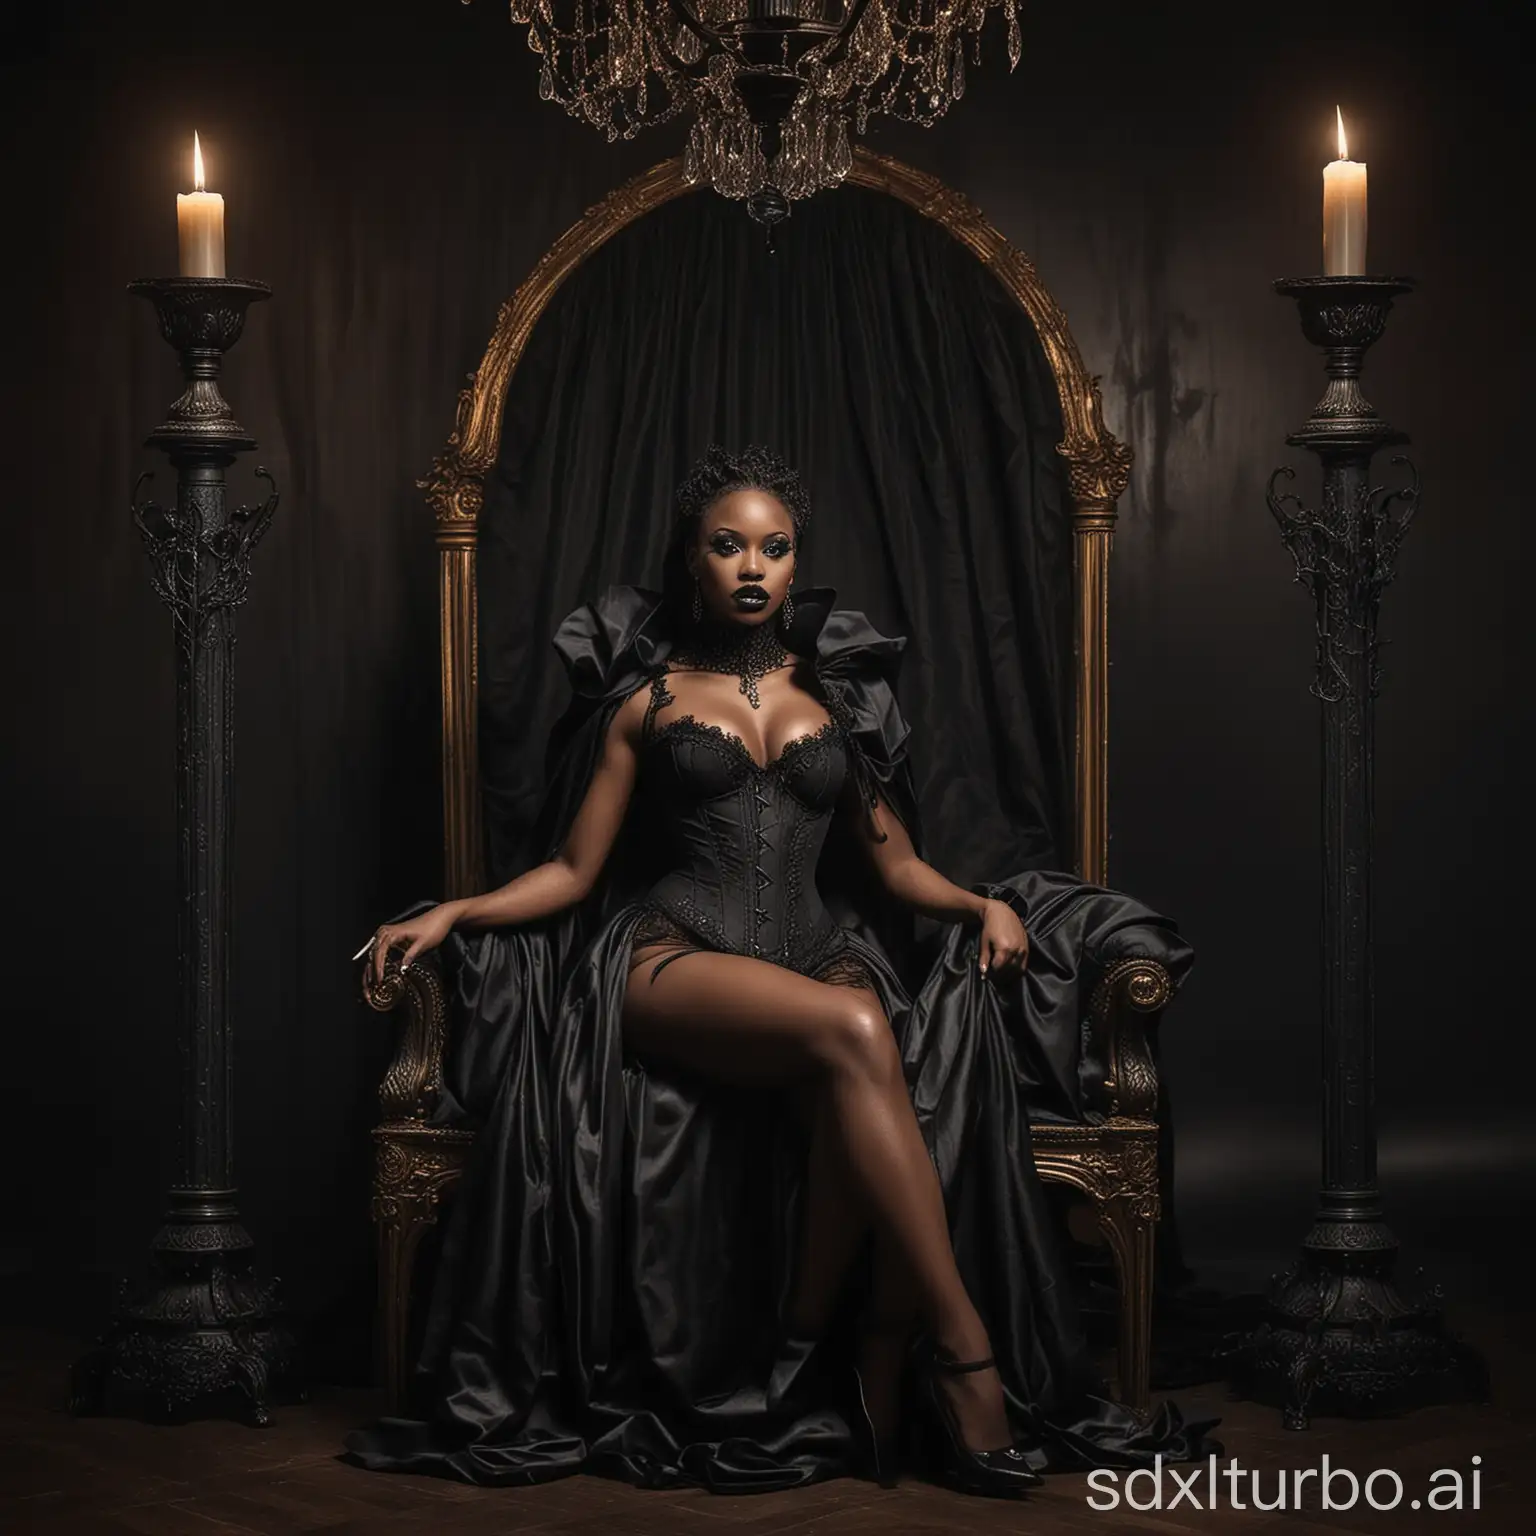 A captivating and dynamic photo of a powerful and majestic black woman, radiating an aura of authority and grace. She is dressed in corset and panties, with a cape adorned high collar that accentuates her strong presence. Her black makeup and high heels highlight her imposing demeanor, sitting on a black throne while on each side a sinister chandelier each with a lit black candle.